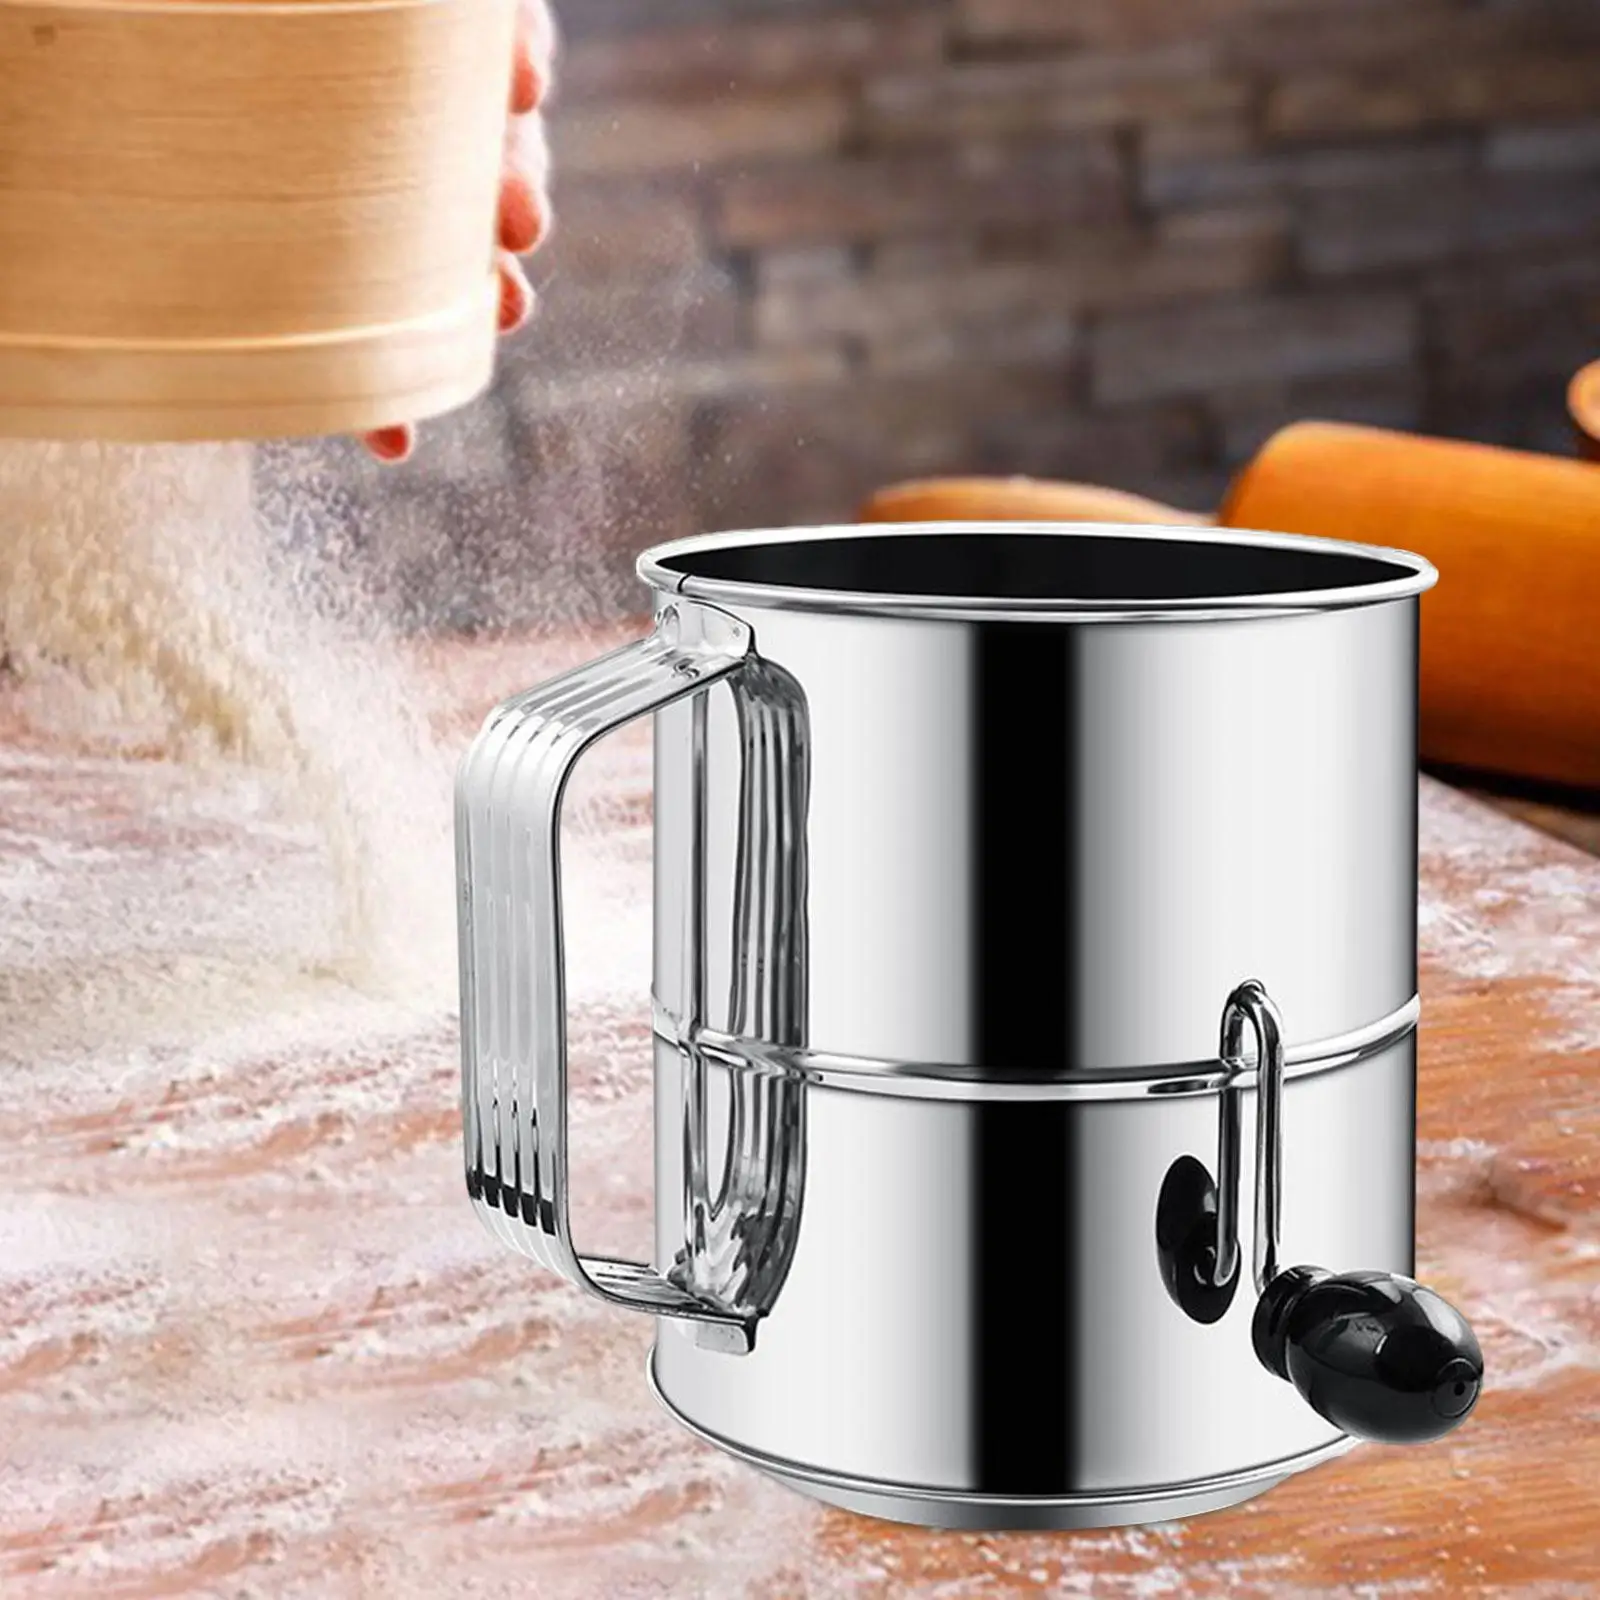 Portable Baking Sieve Cup Flour Sifter for Cake Decorating Baking Pastry